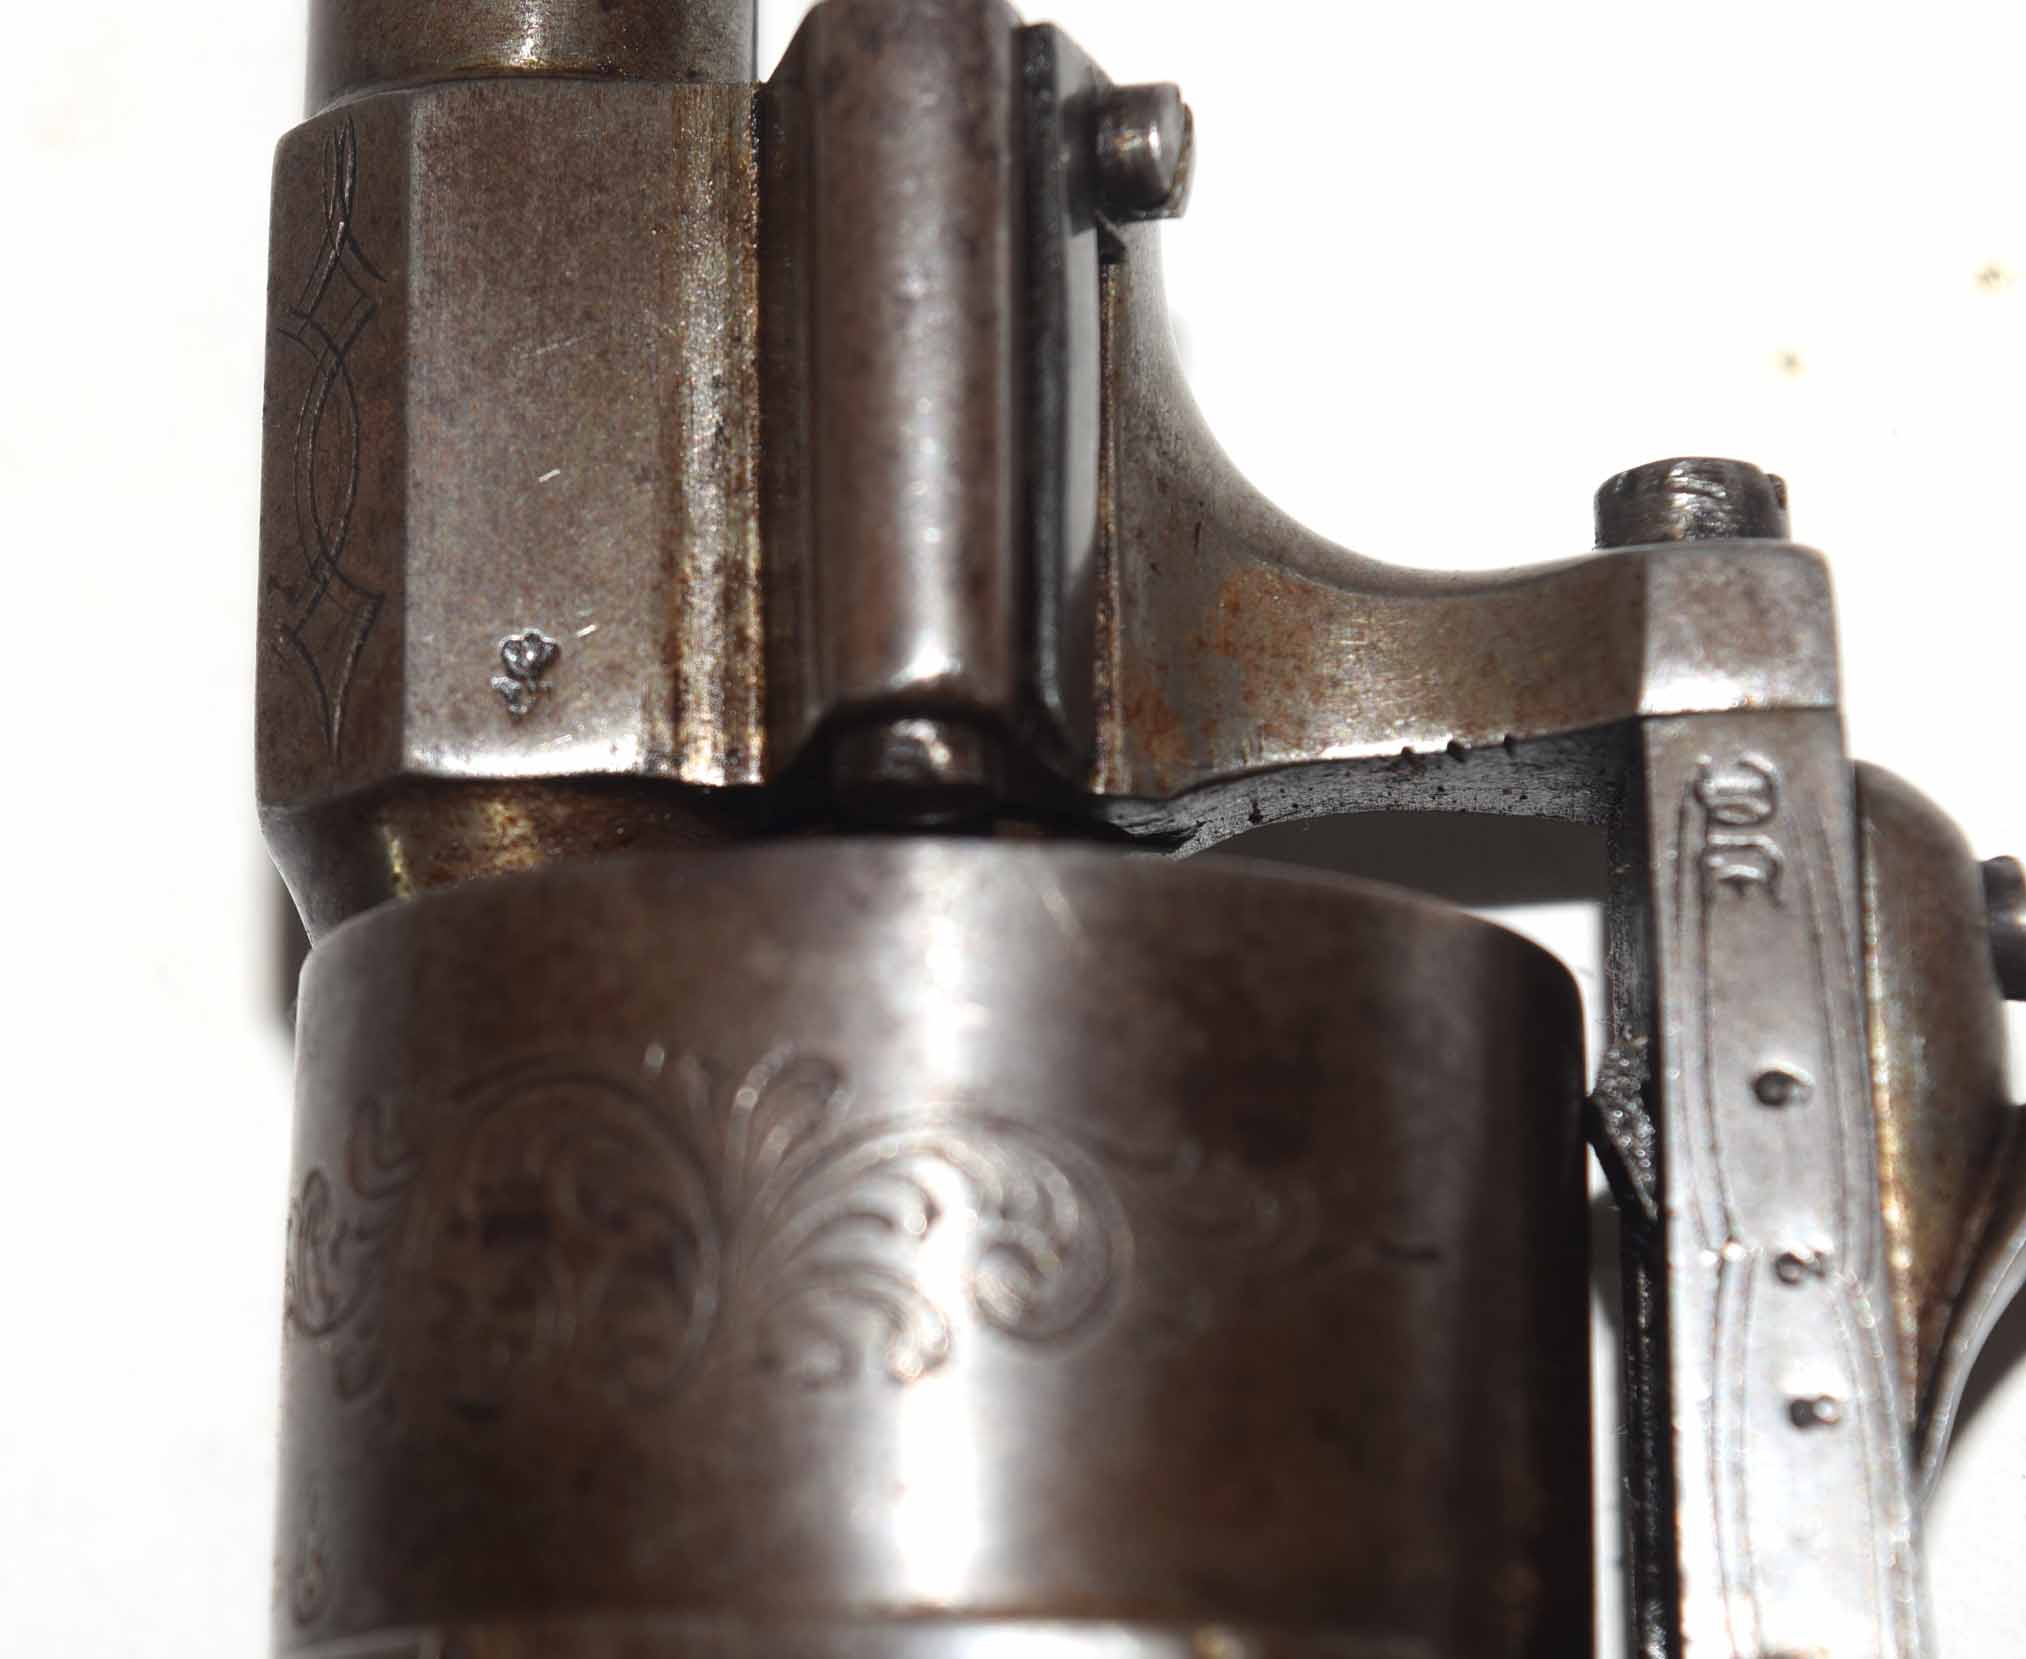 19th century c1880 Liege pin fire revolver, 6-shot double action calibre 12mm pistol with Liege - Image 5 of 7